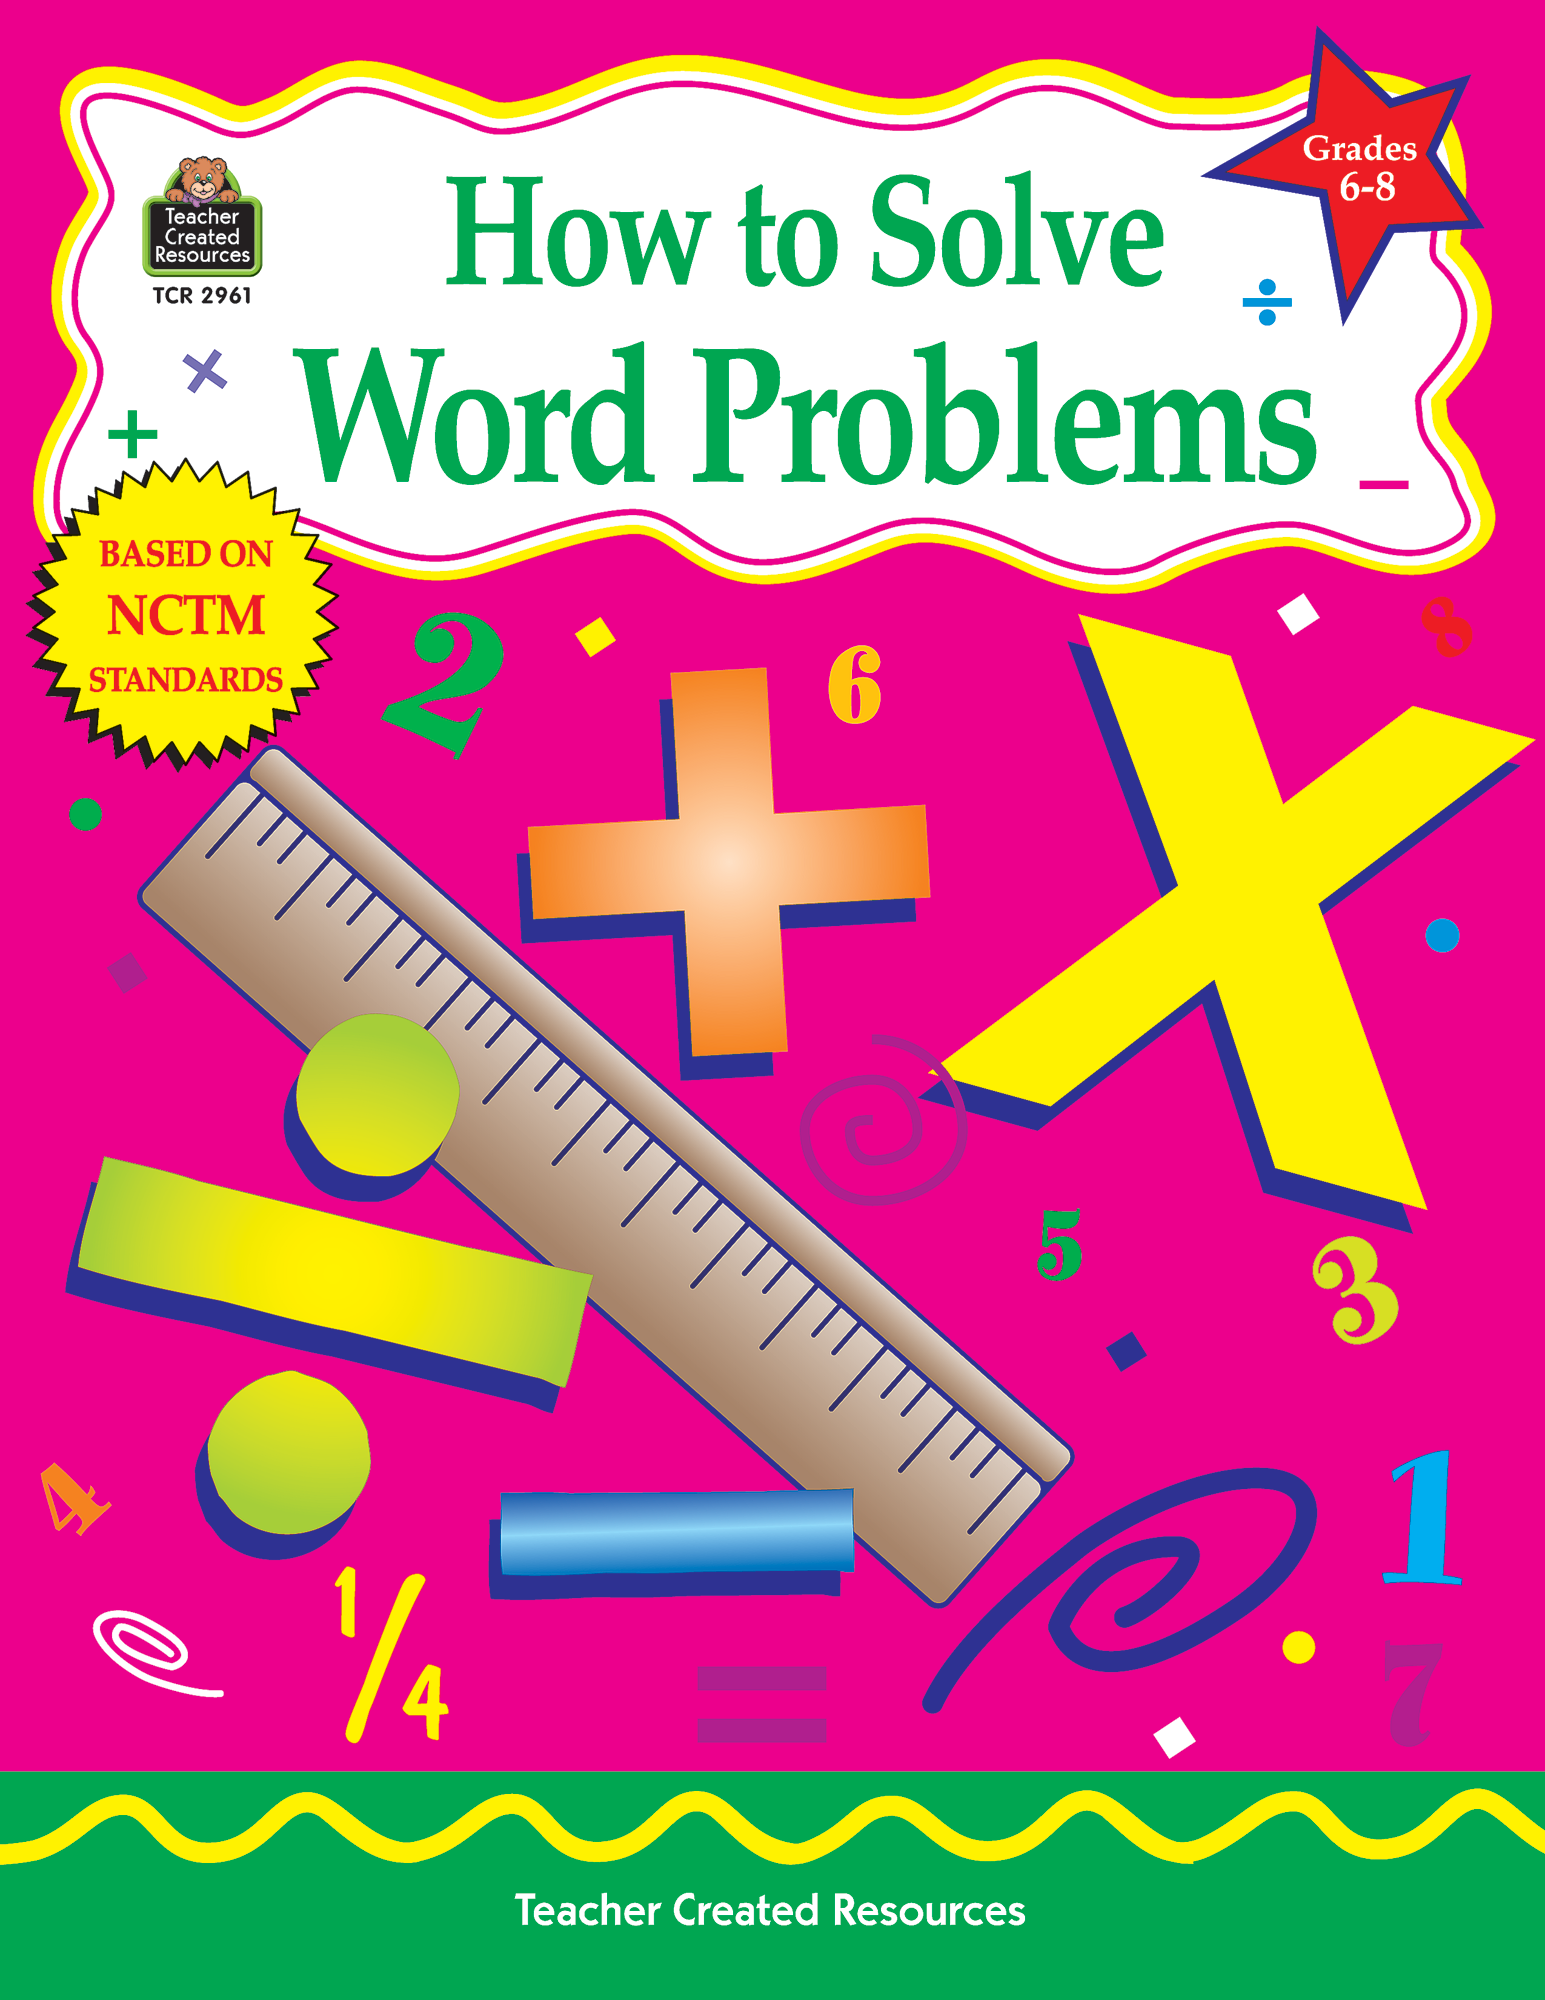 how-to-solve-word-problems-grades-6-8-tcr2961-teacher-created